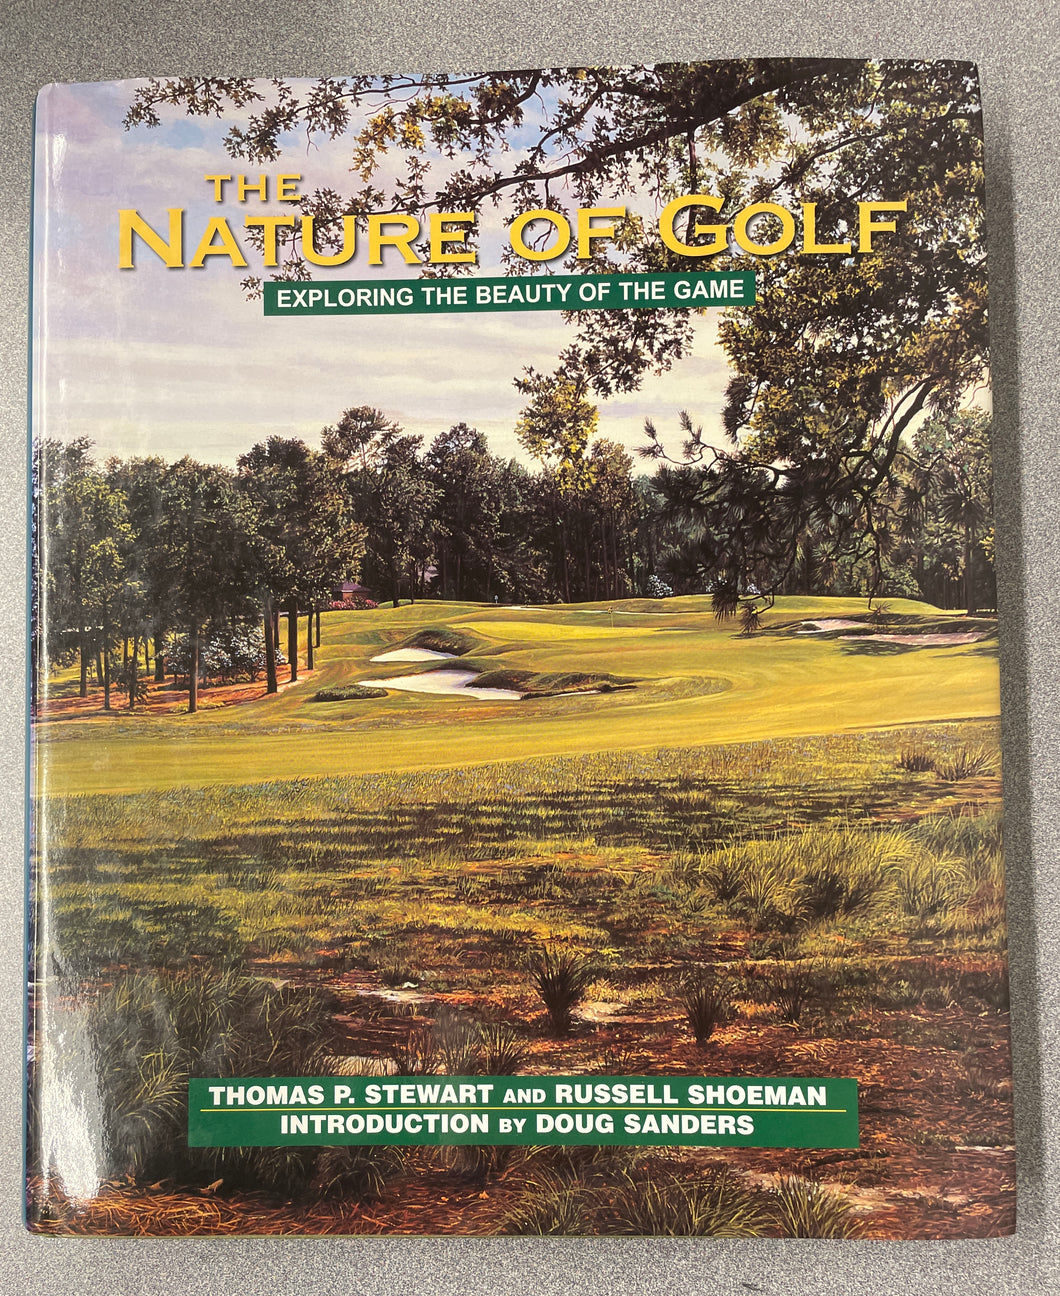 The Nature of Golf: Exploring the Beauty of the Game, Stewart, Thomas P. and Russell Shoeman [1999] OU 5/24